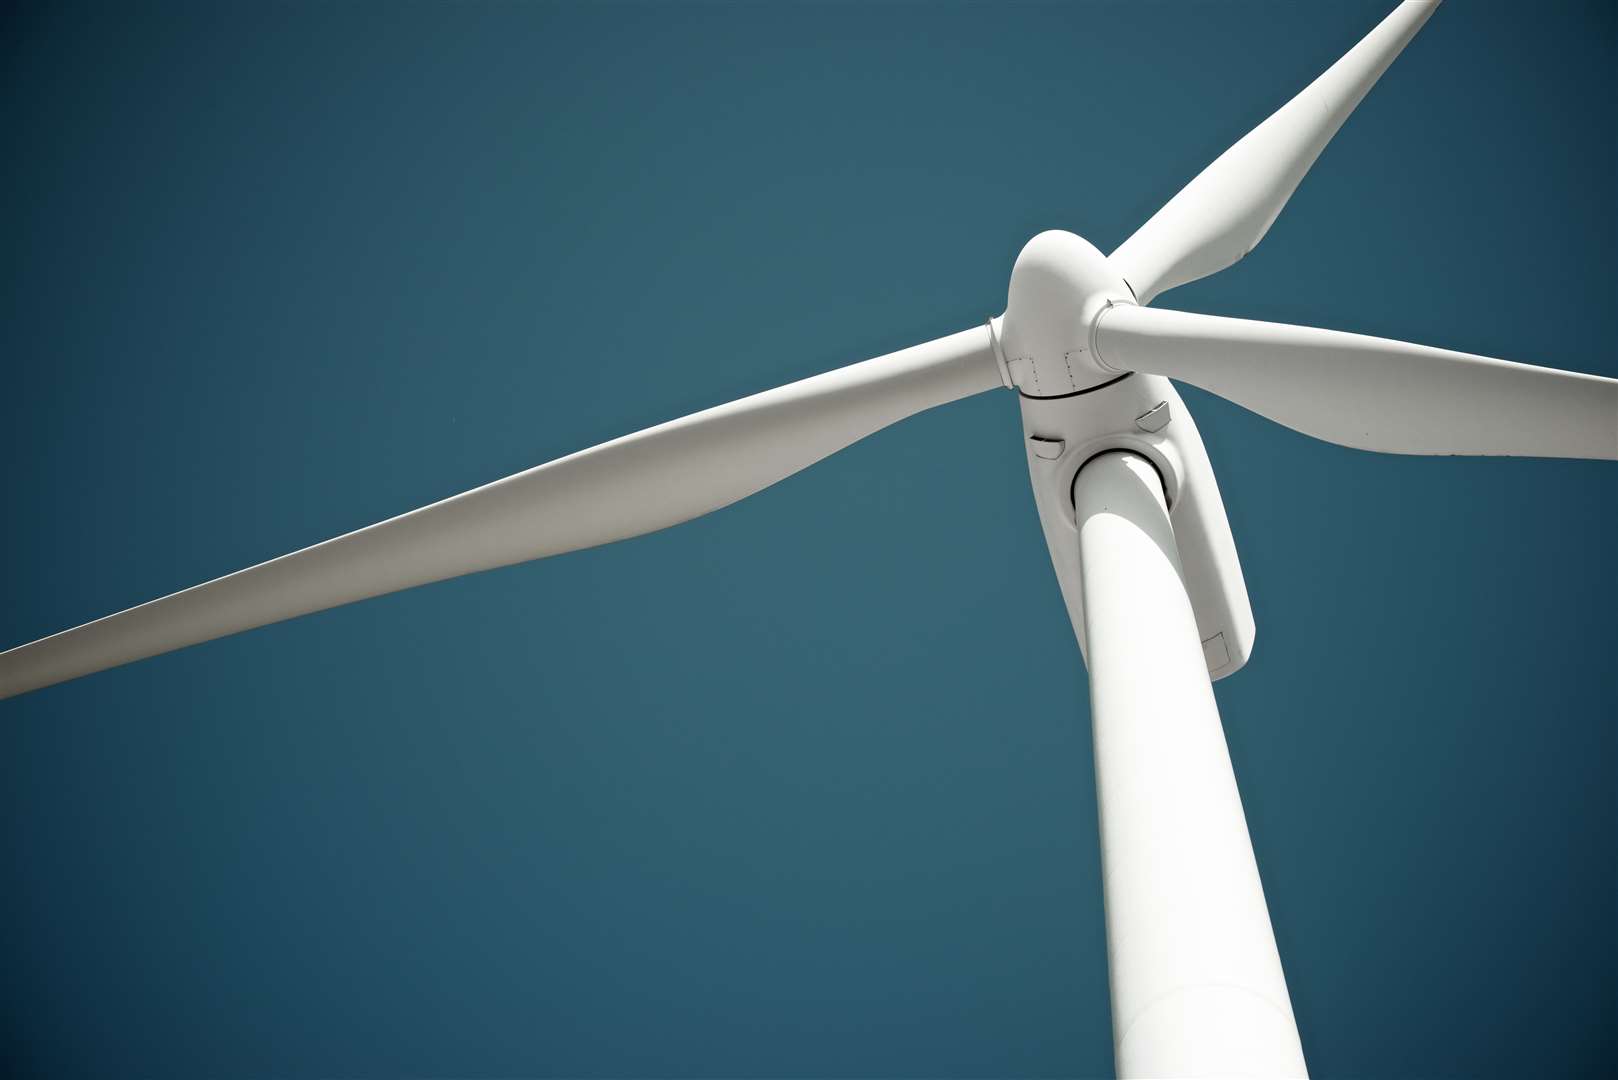 German-owned Energiekontor UK hopes to build an 11-turbine wind farm at Strath Oykel. The massive, 200m turbines would be amongst the tallest in the country.